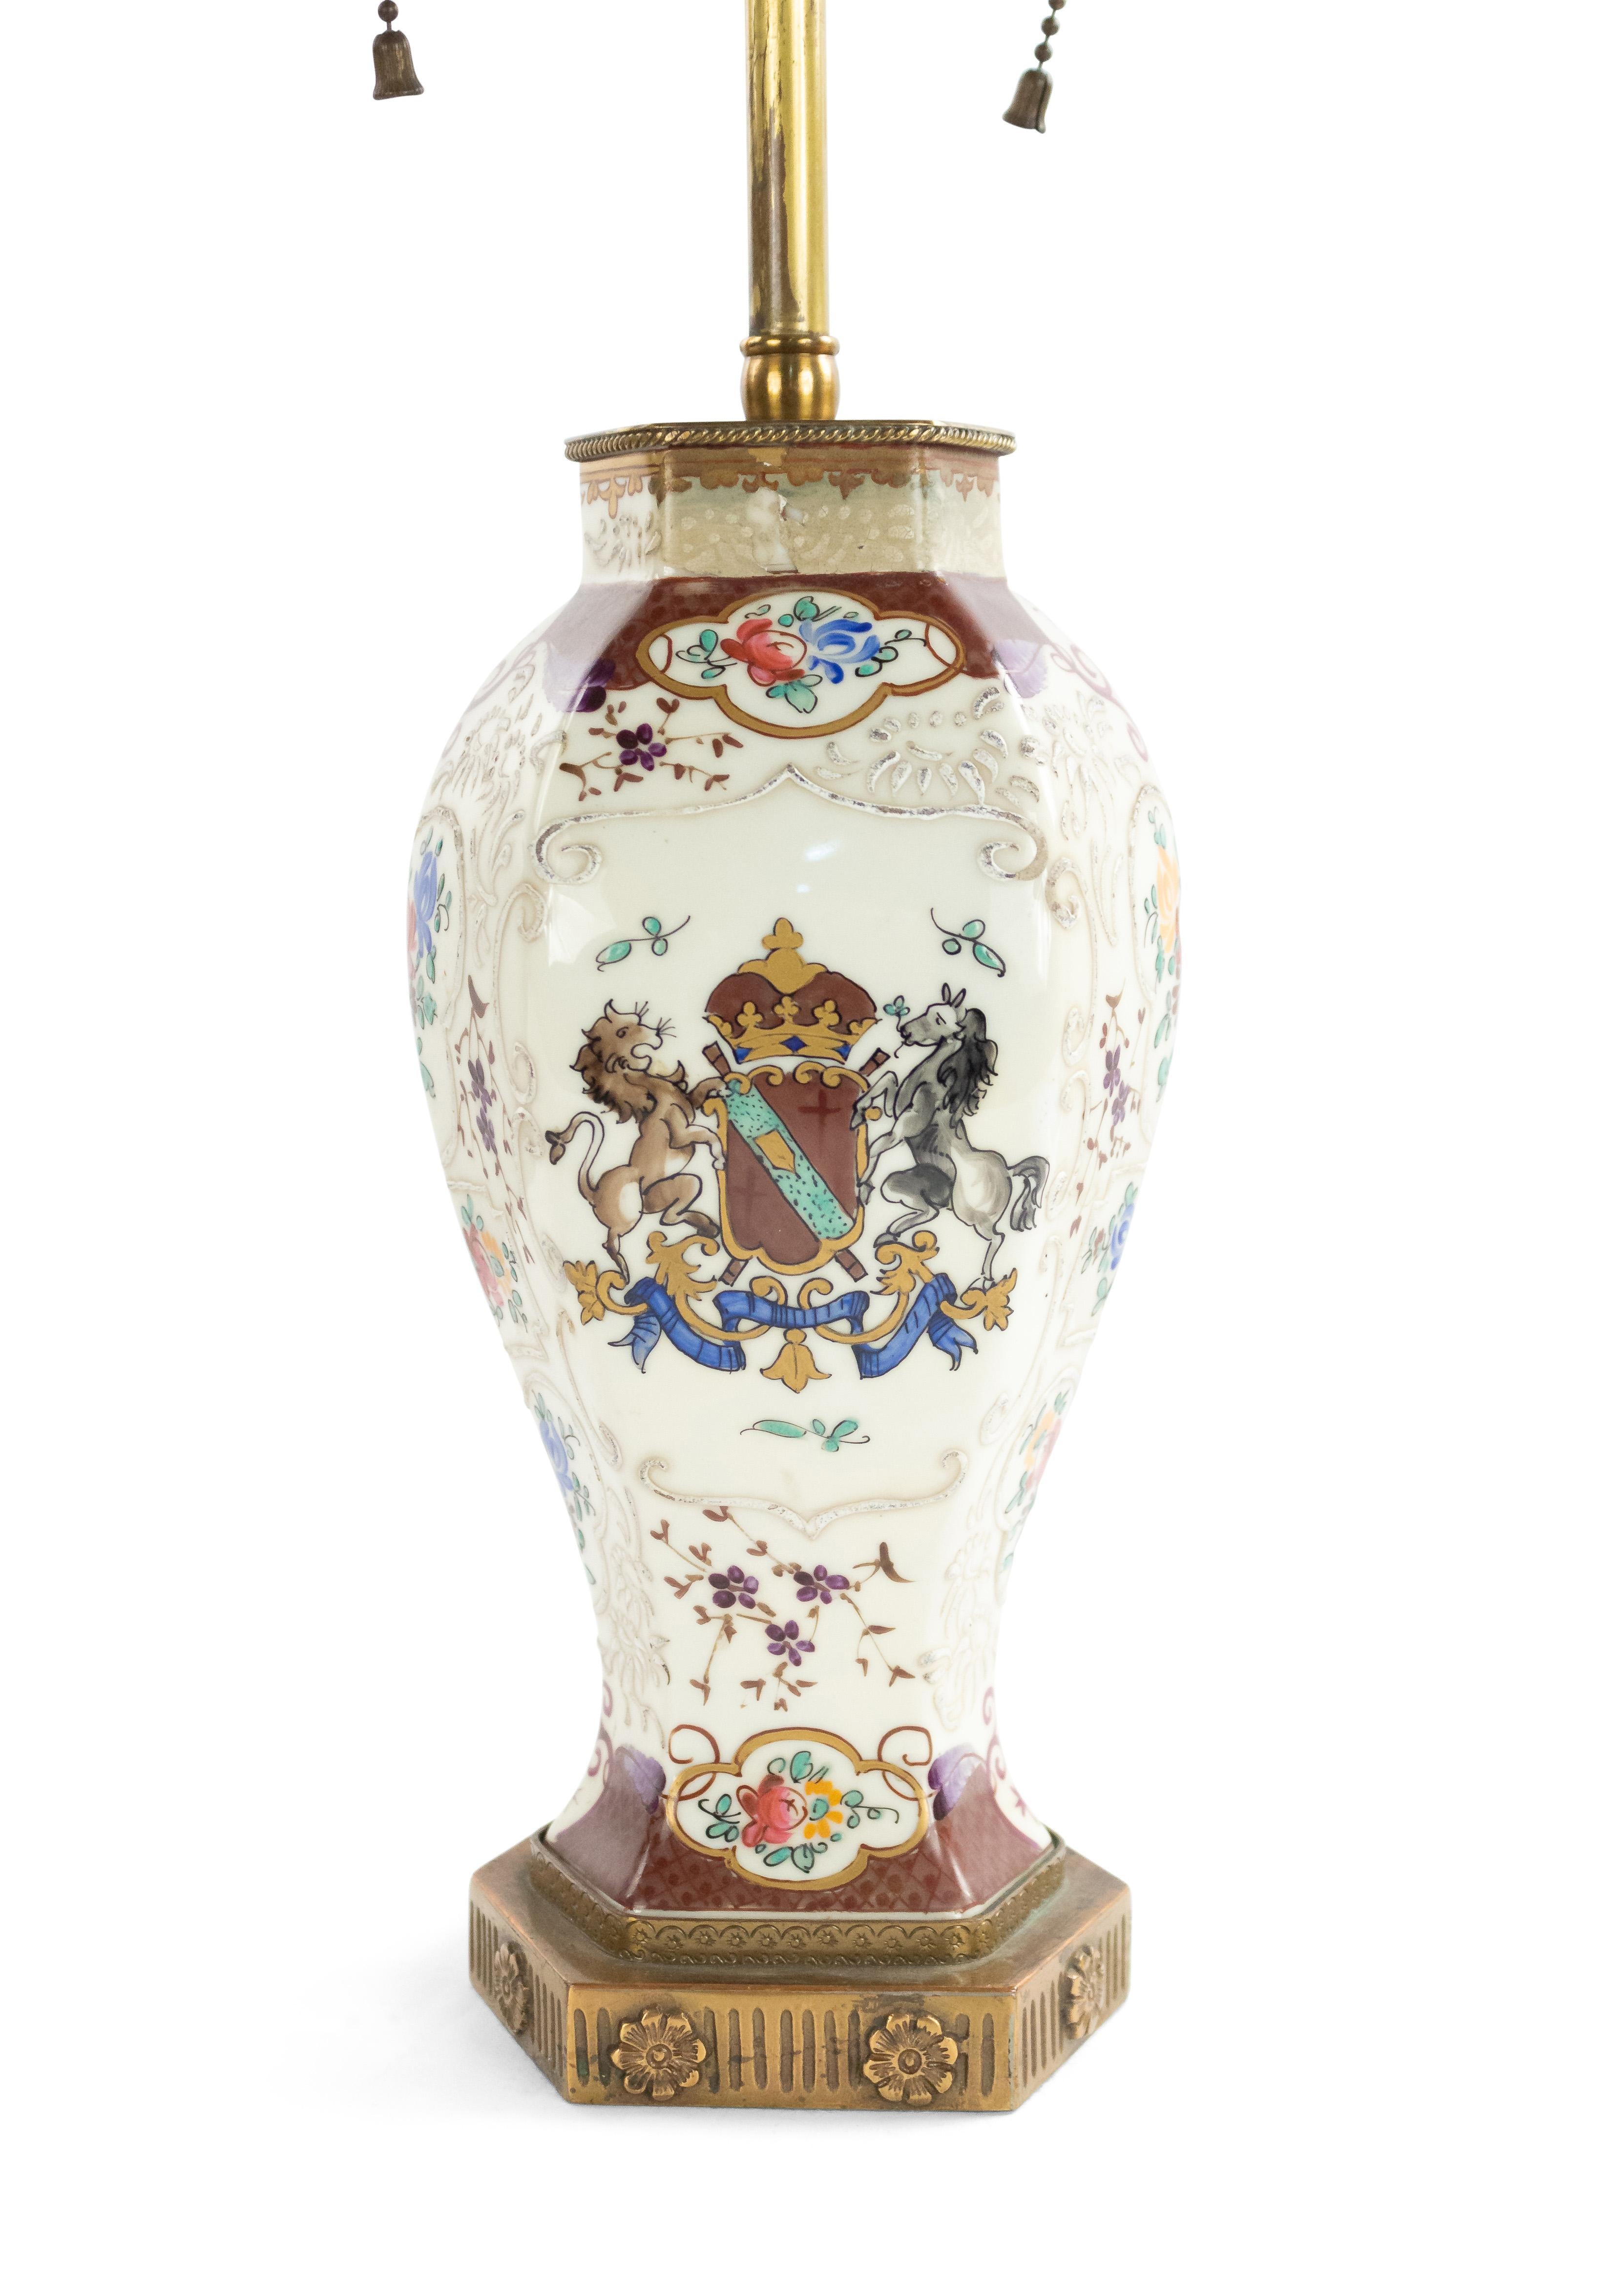 English Victorian decorated porcelain table lamp with armorial crest design and 6 sided base.